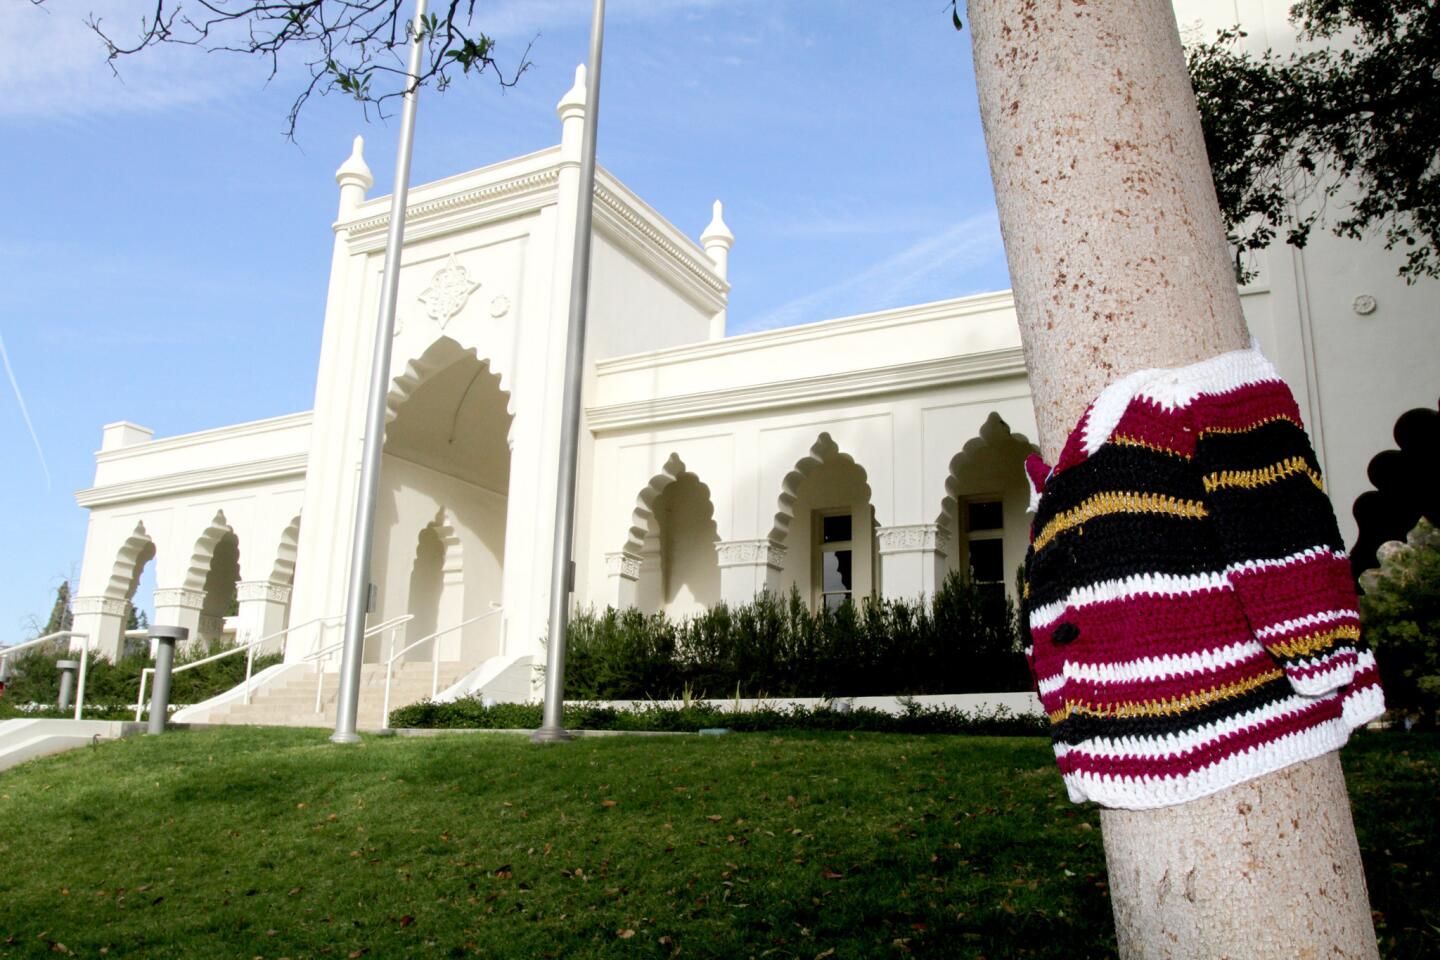 Photo Gallery: Brand Library grounds artistically yarn bombed by knit graffiti movement